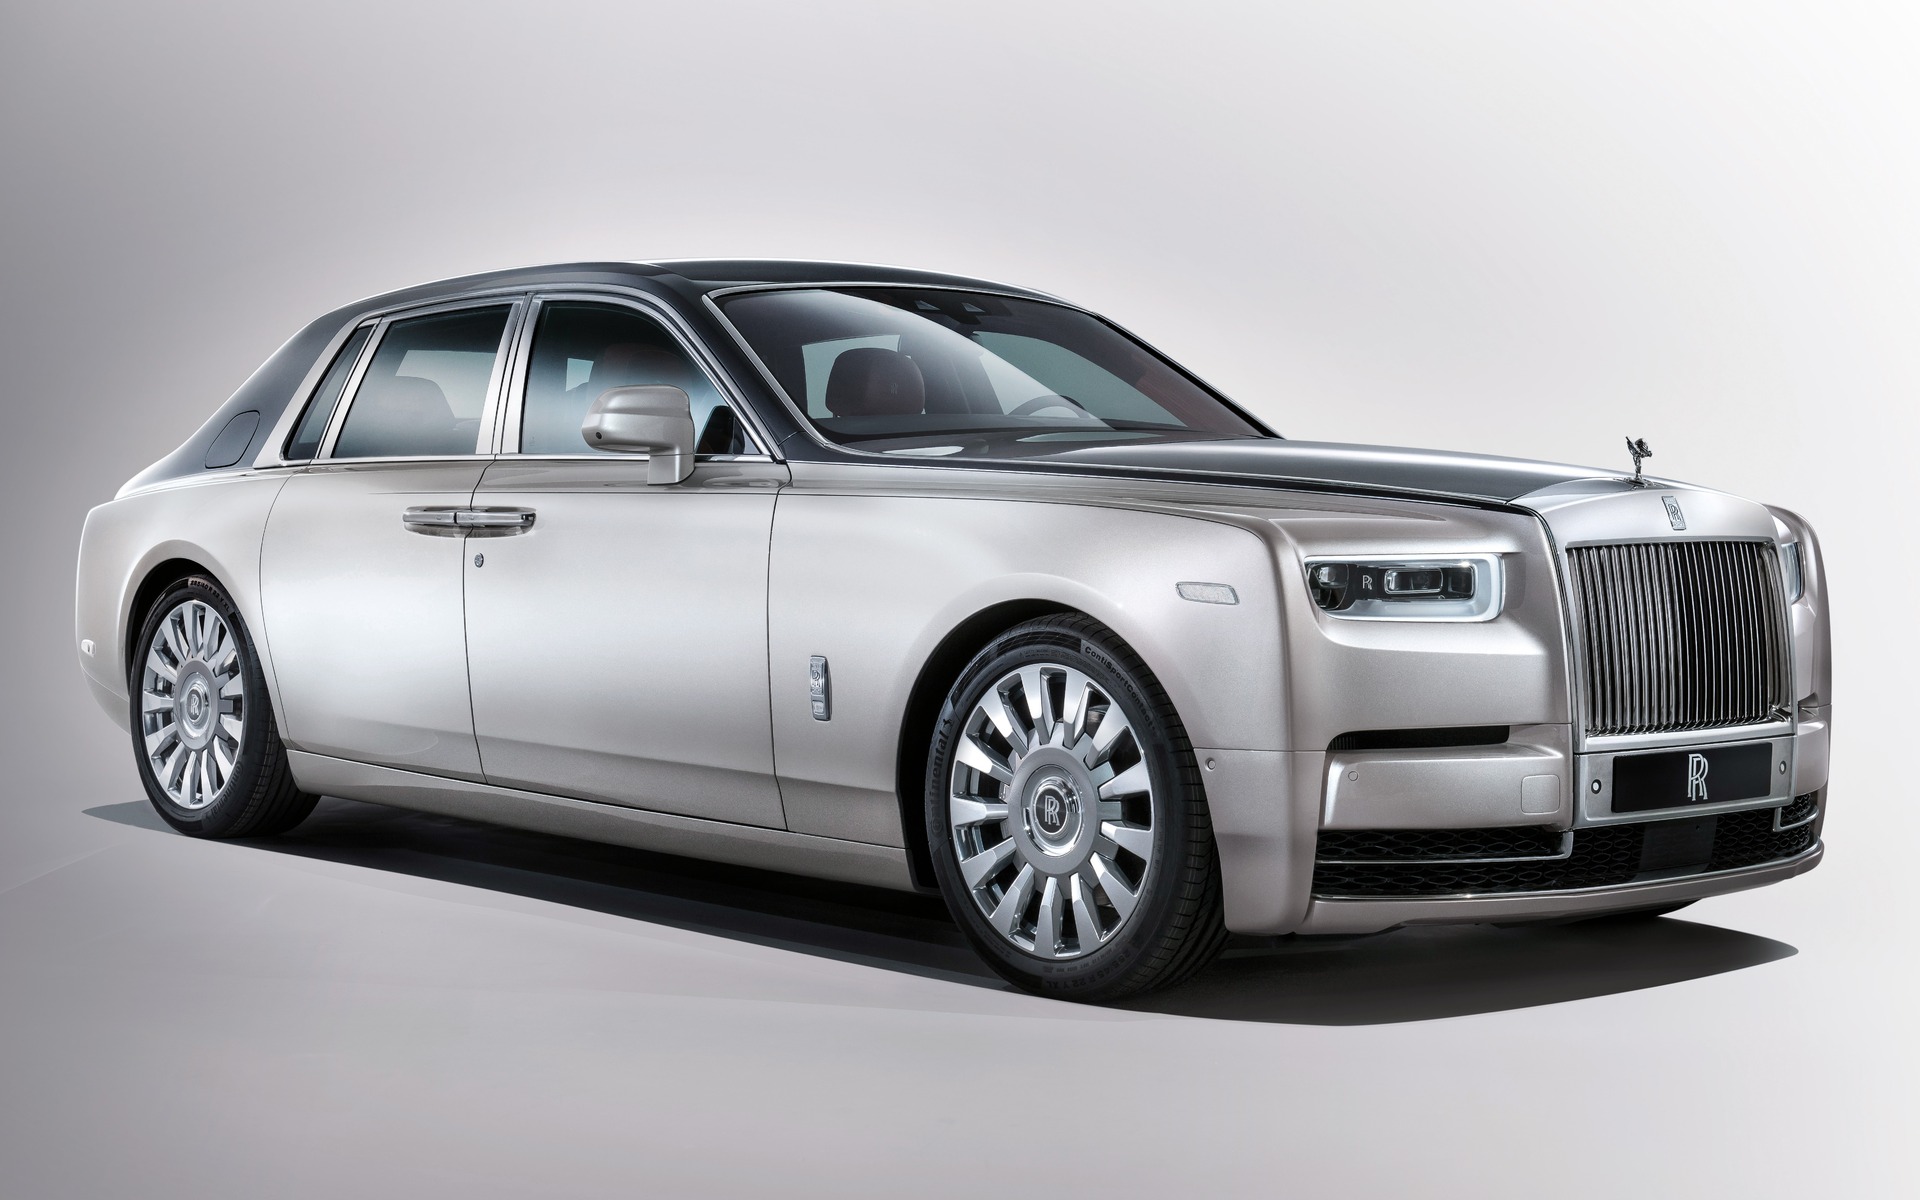 Rolls Royce first electric car Spectre unveiled South Korea check price  features colours new EV cars latest news  Rolls News  India TV